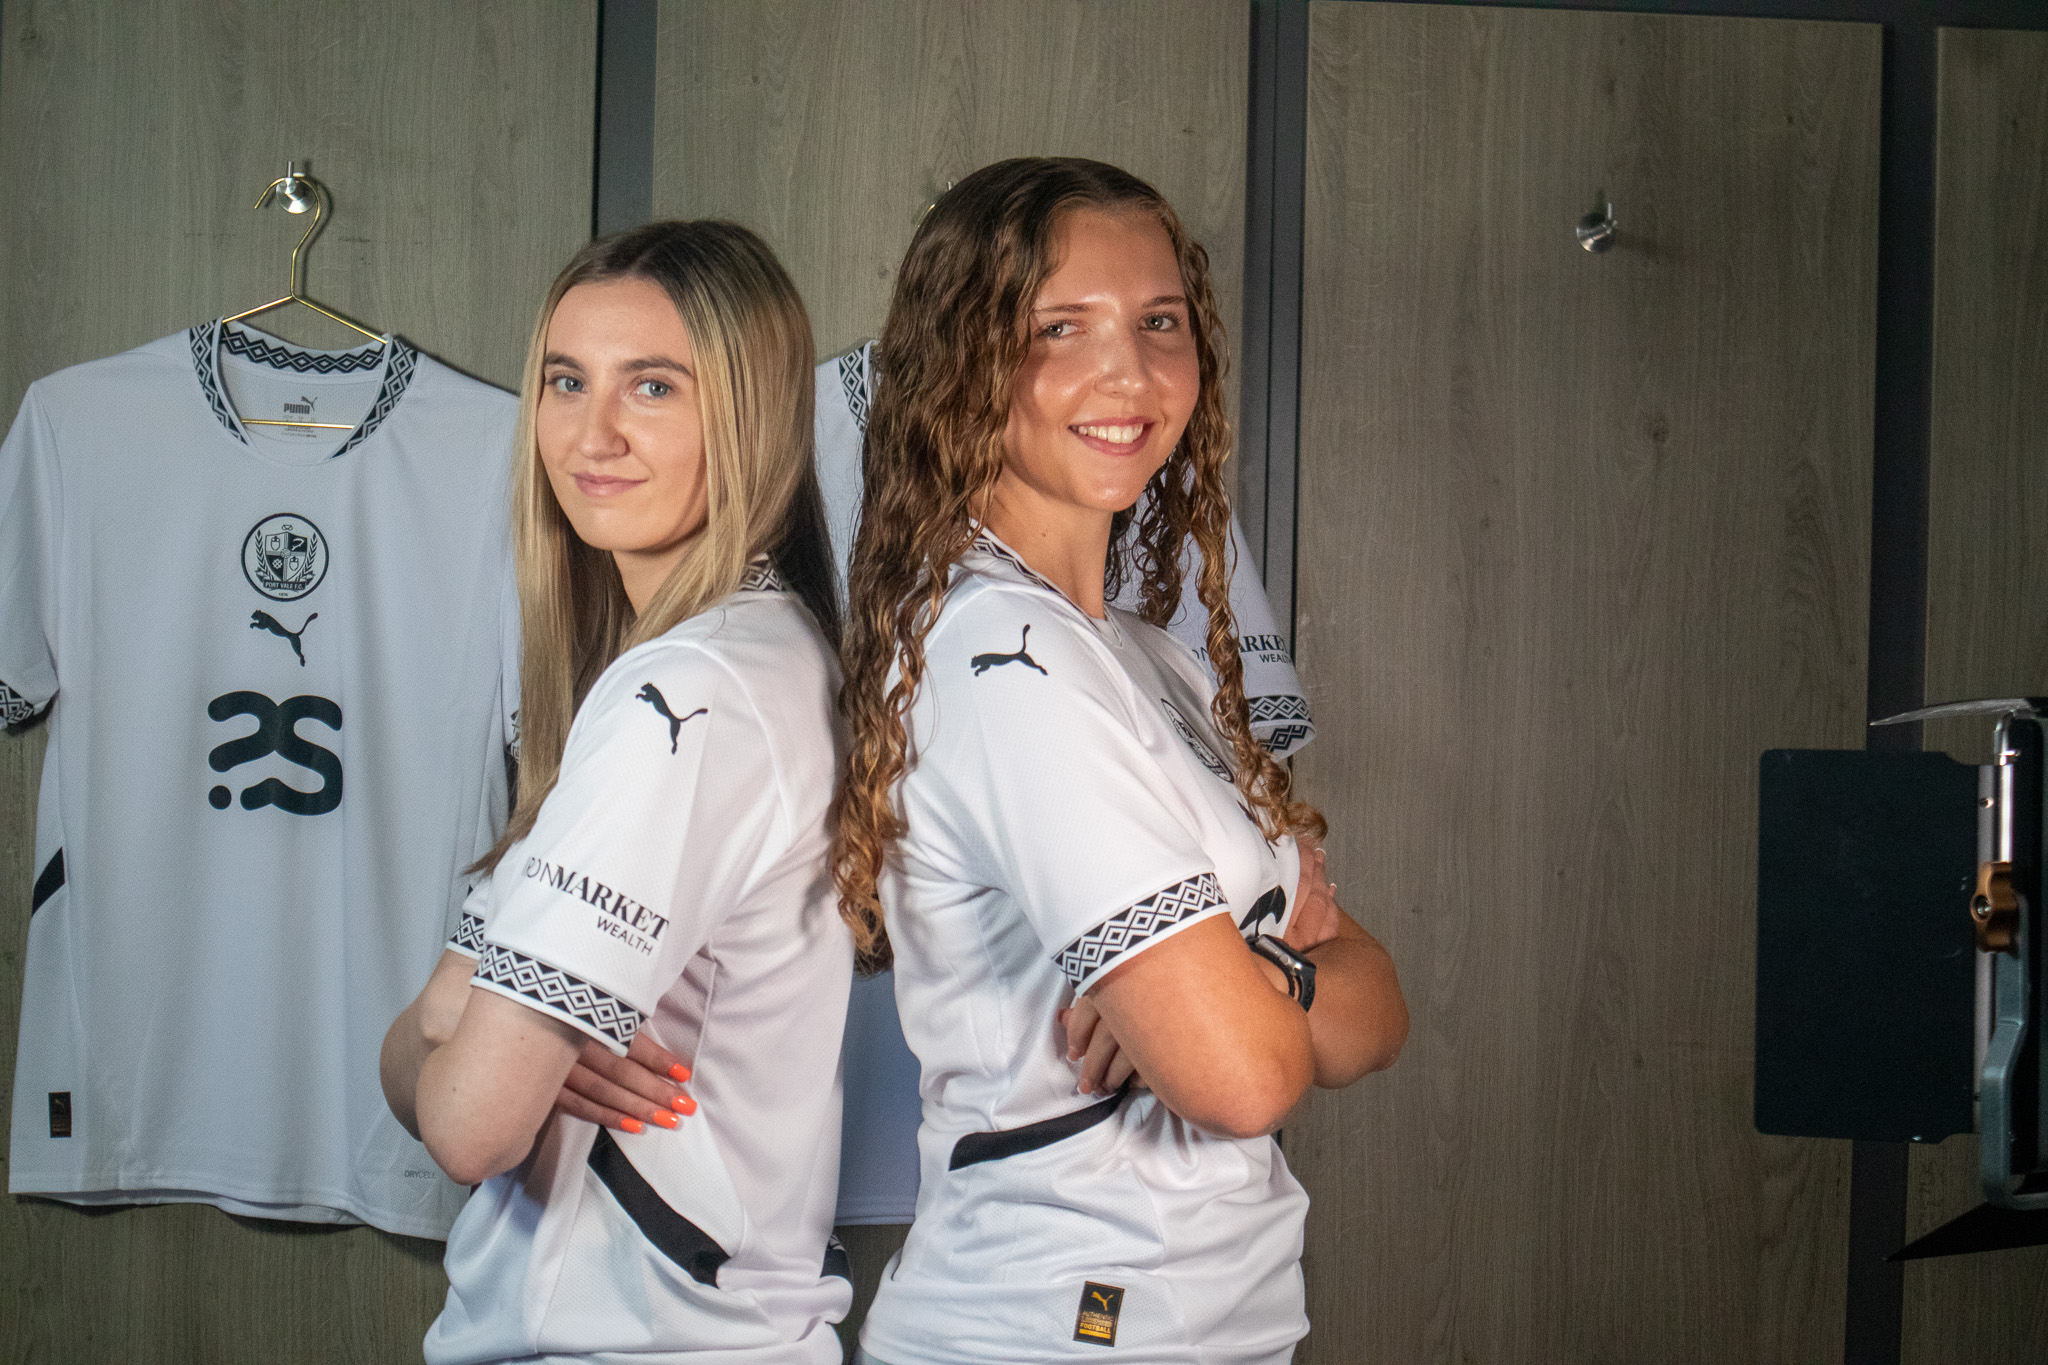 Lilly Jackson and Dani Ebsworth standing back to back in the new Port Vale FC Home Kit